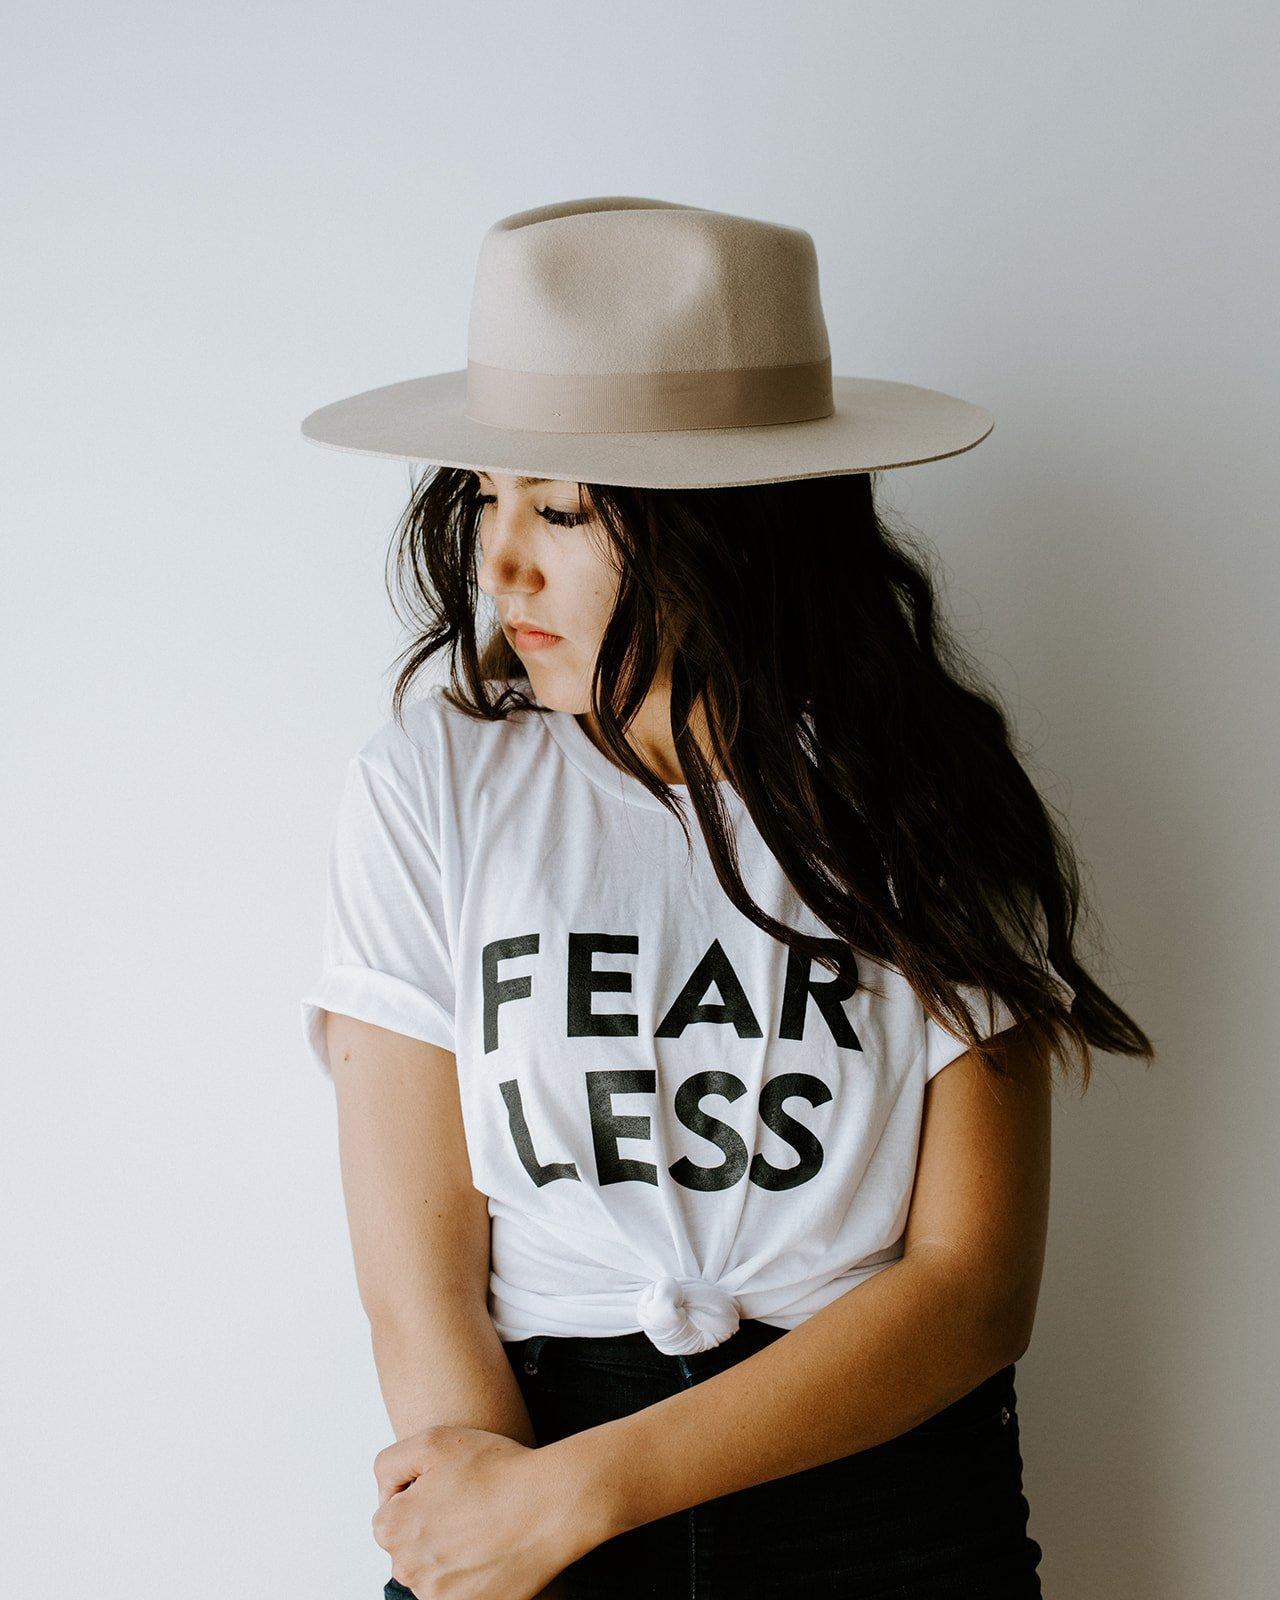 FEARLESS - White